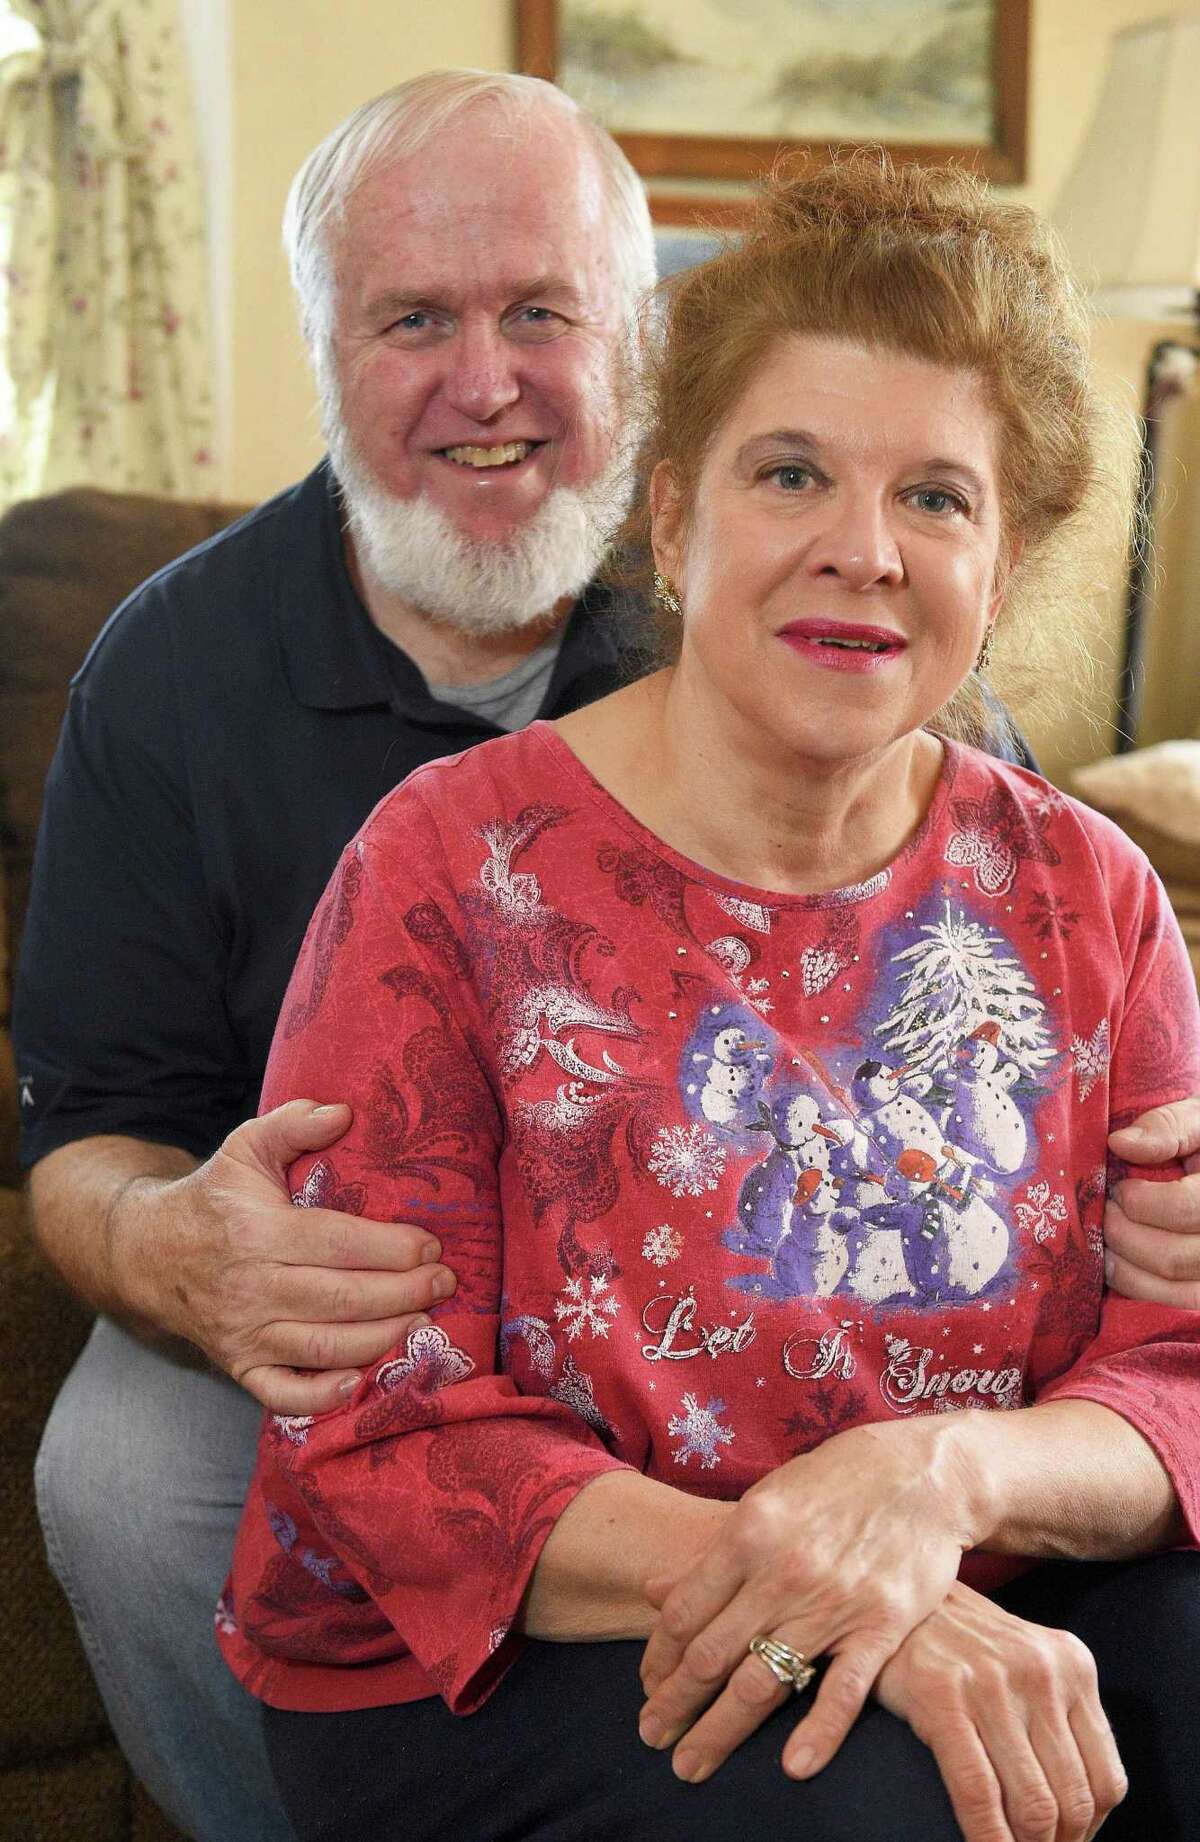 Betsy and Jon Henry, who recently celebrated their 44th wedding anniversary, are photograph at there home Stamford, Conn. on Wednesday, Feb. 13, 2019.